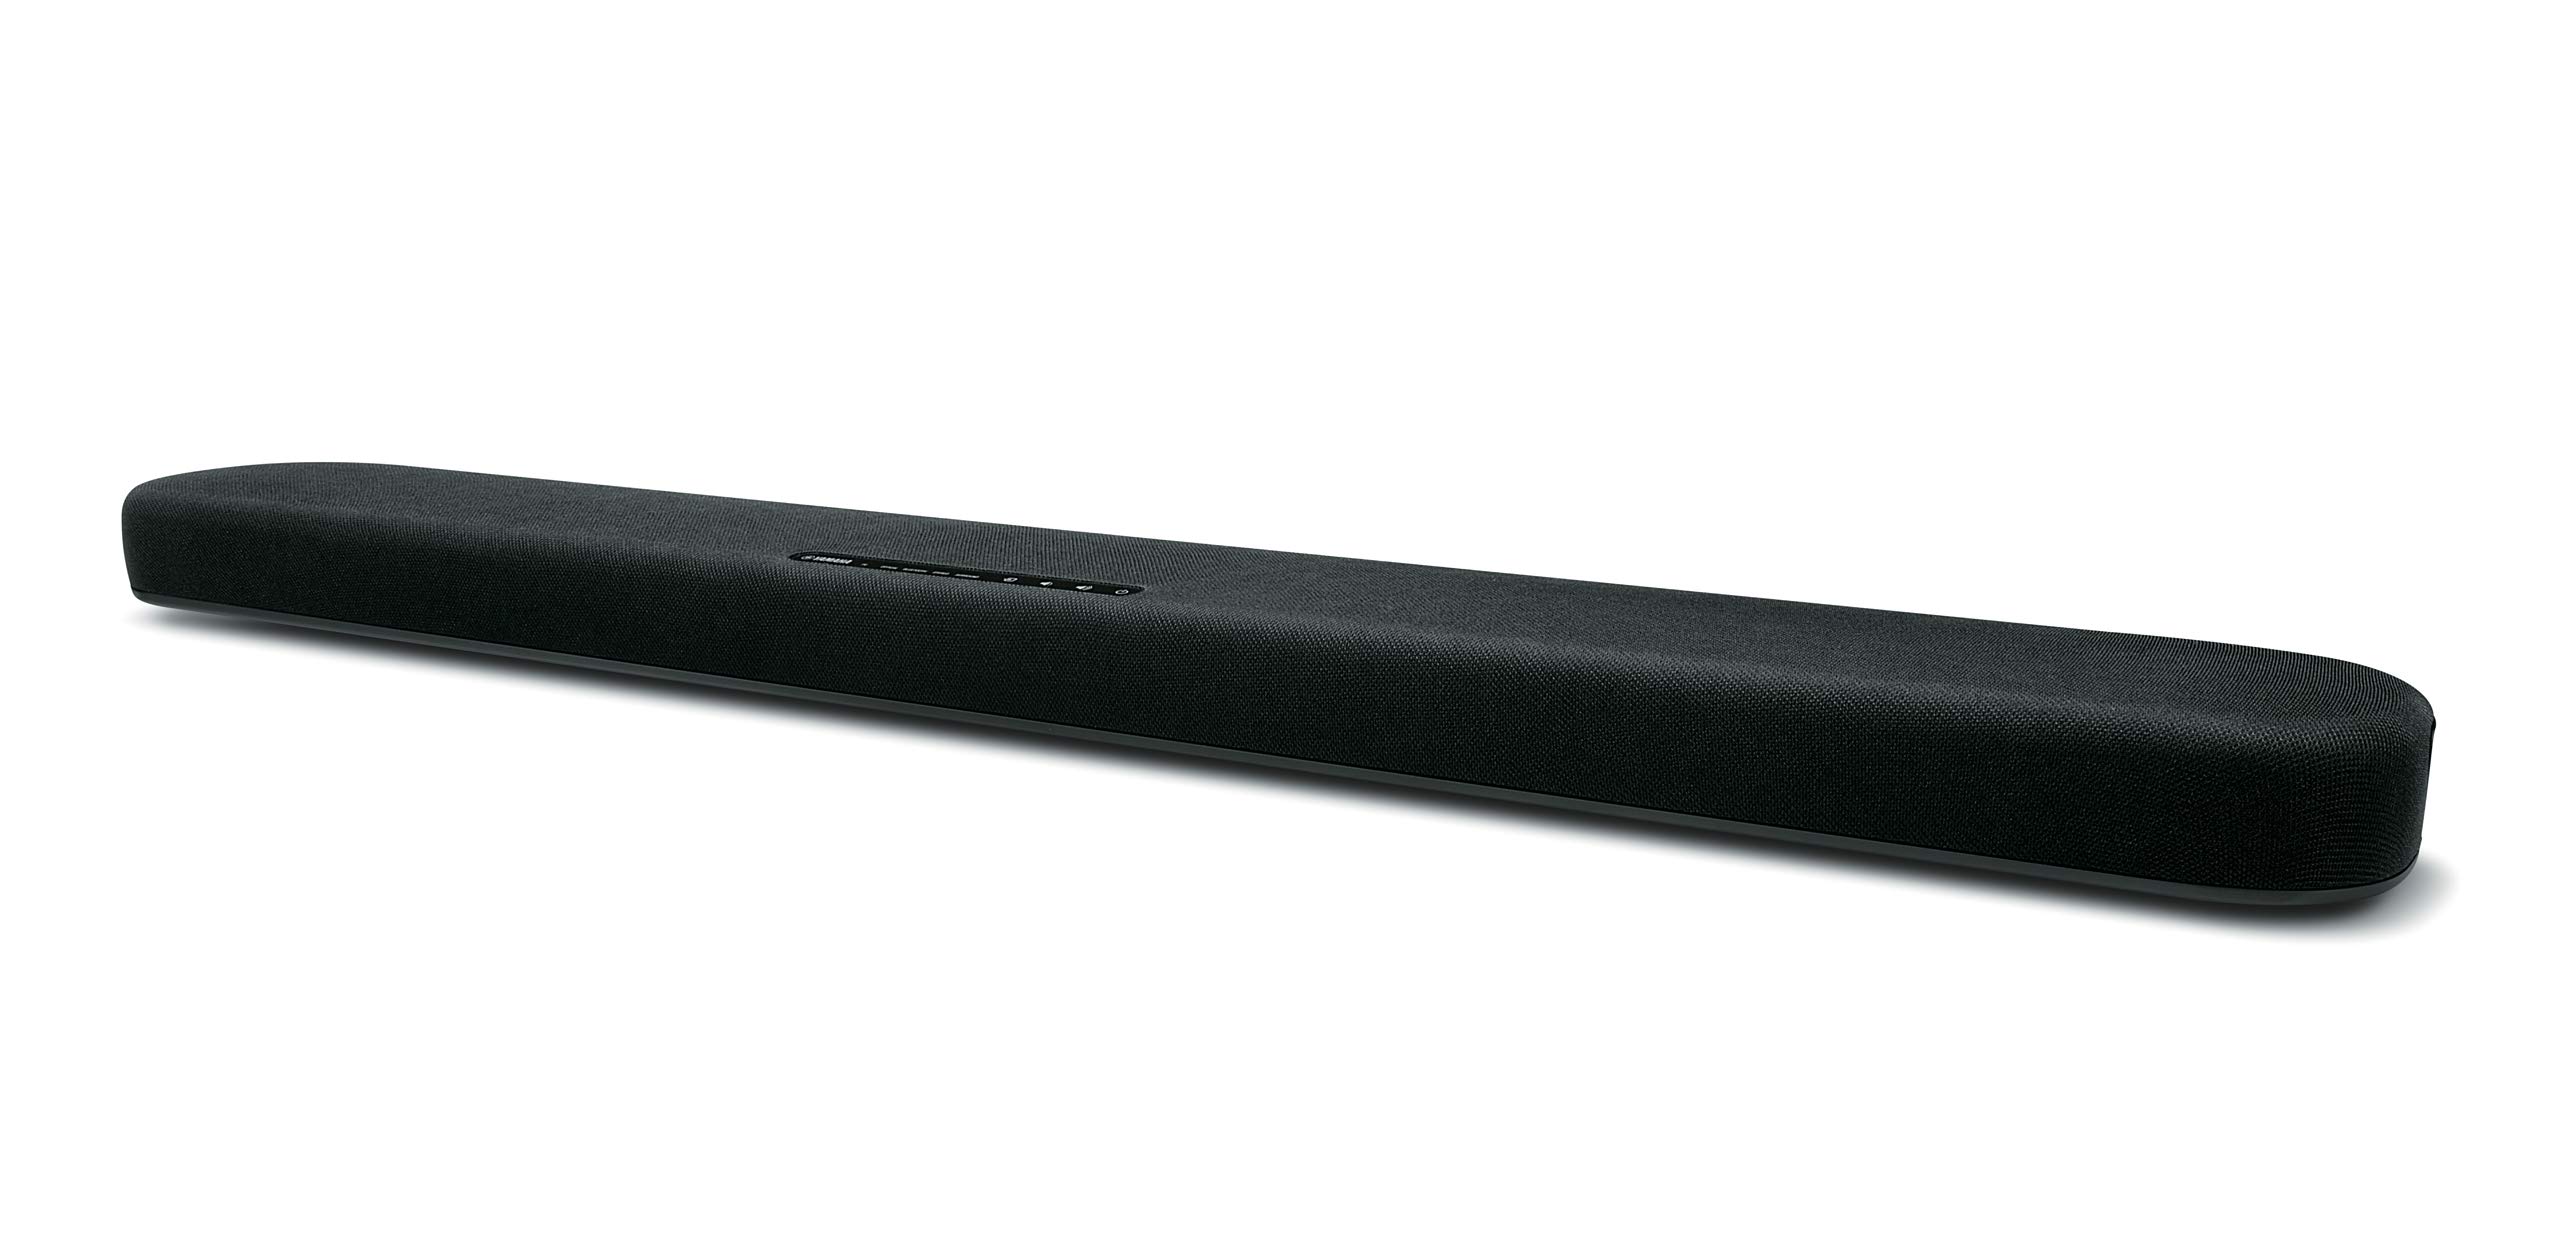 Yamaha Audio SR-B20A Sound Bar with Built-in Subwoofers...